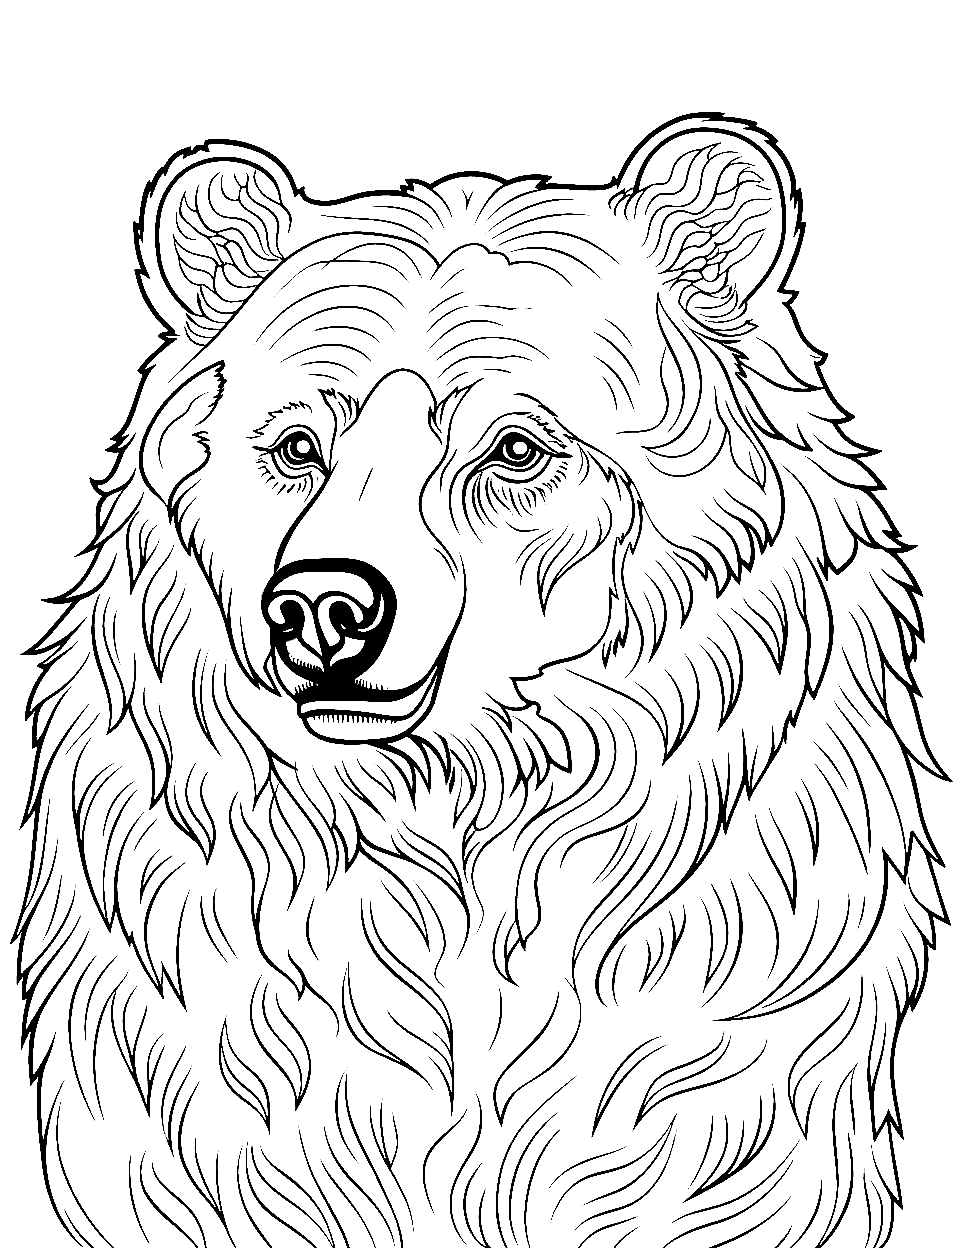 Advanced Grizzly Sketch Coloring Page - A close-up grizzly bear with intricate fur detailing for advanced colorists.